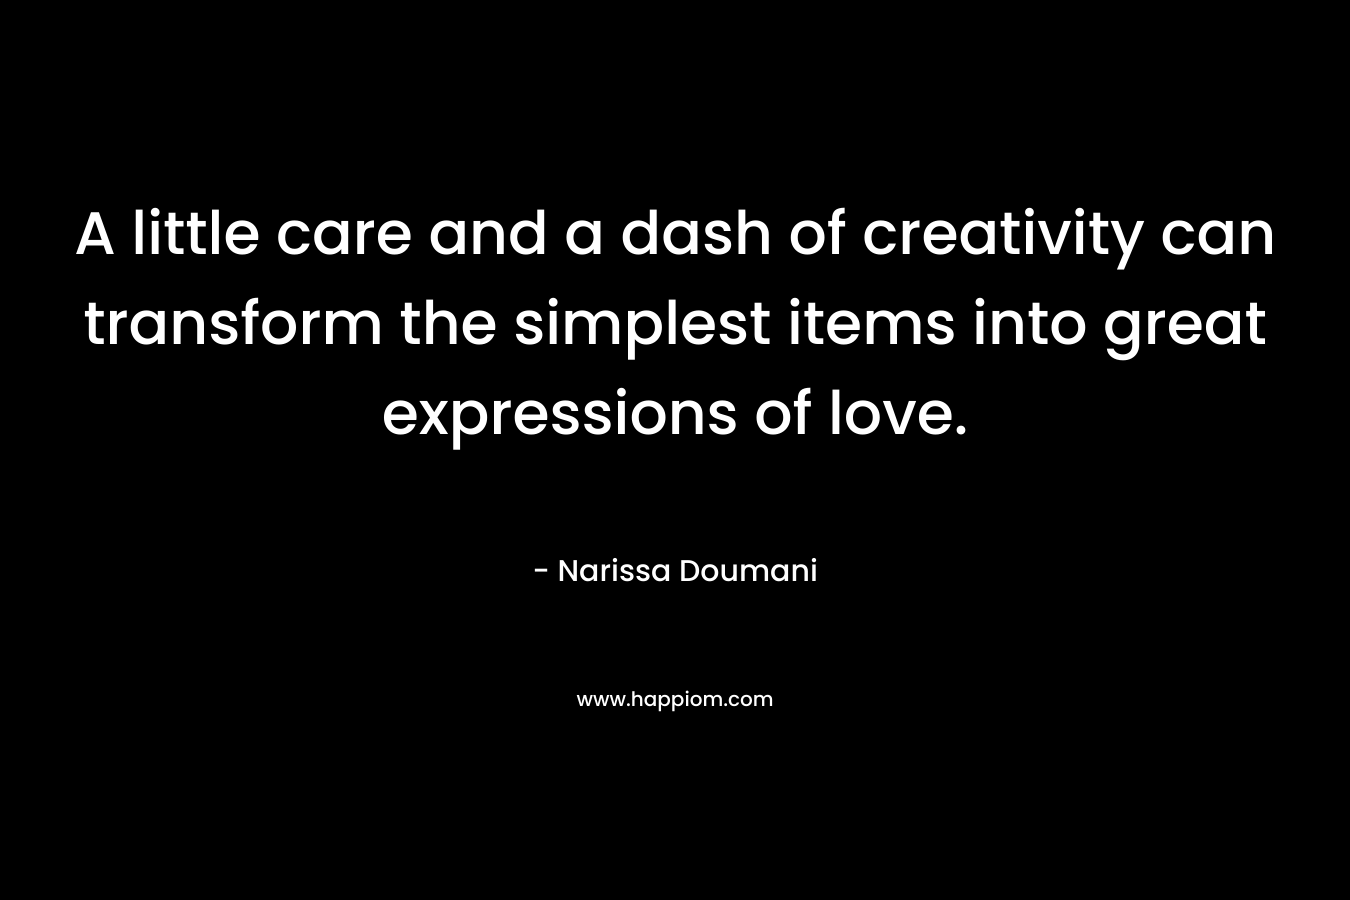 A little care and a dash of creativity can transform the simplest items into great expressions of love. – Narissa Doumani